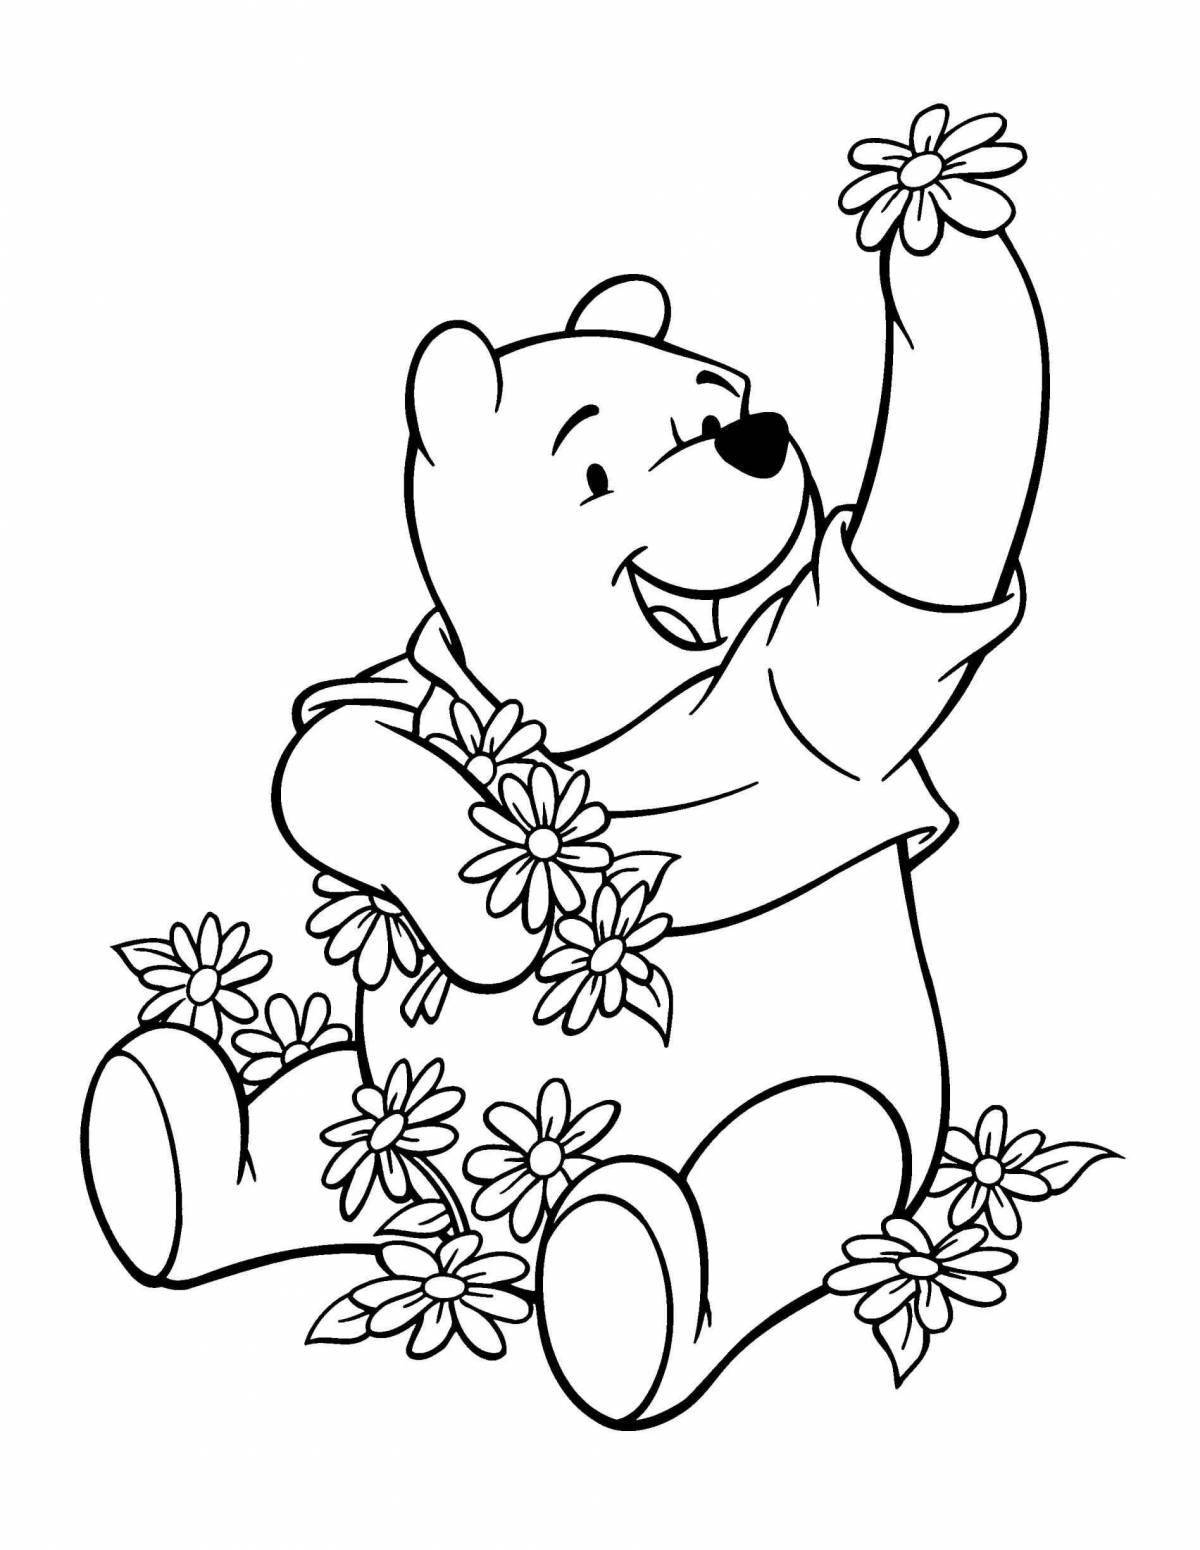 Gorgeous winnie the pooh coloring book